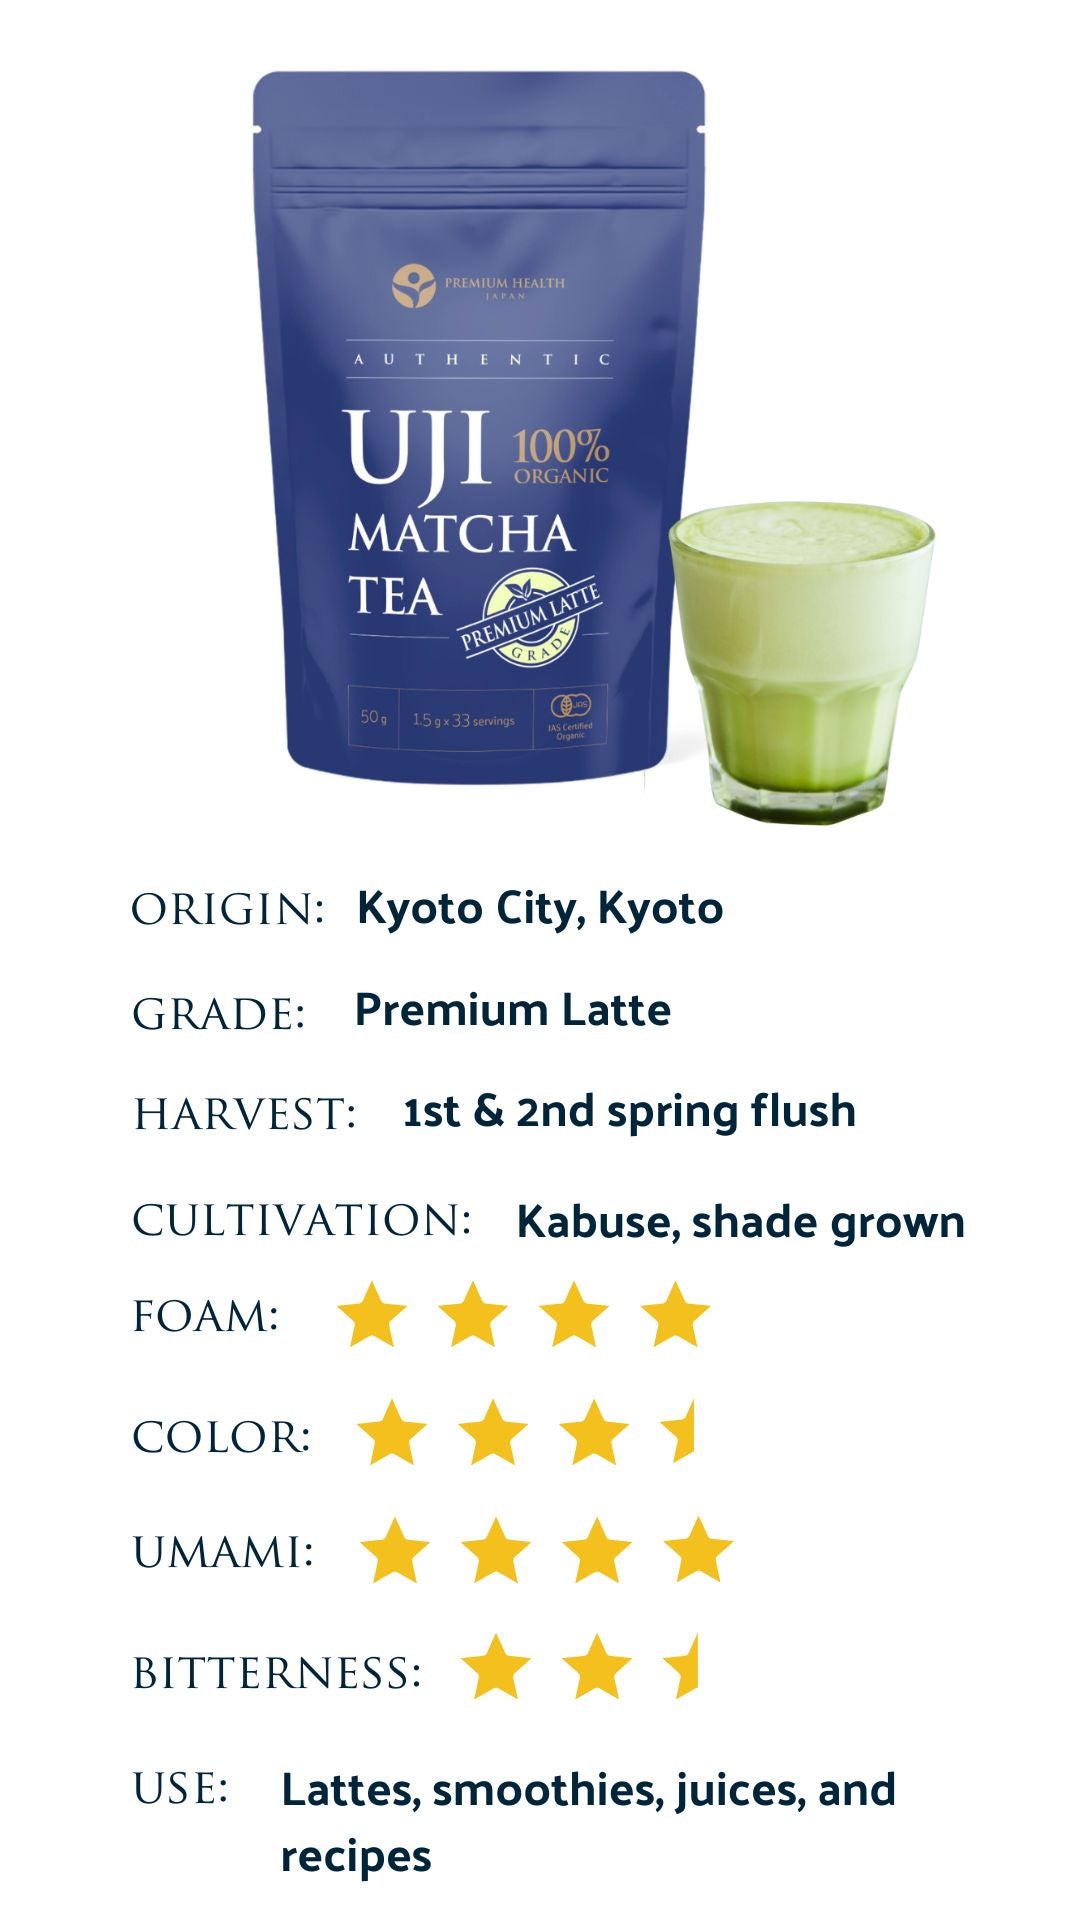 Product profile for our premium latte grade Uji matcha which rates the product according to various categories